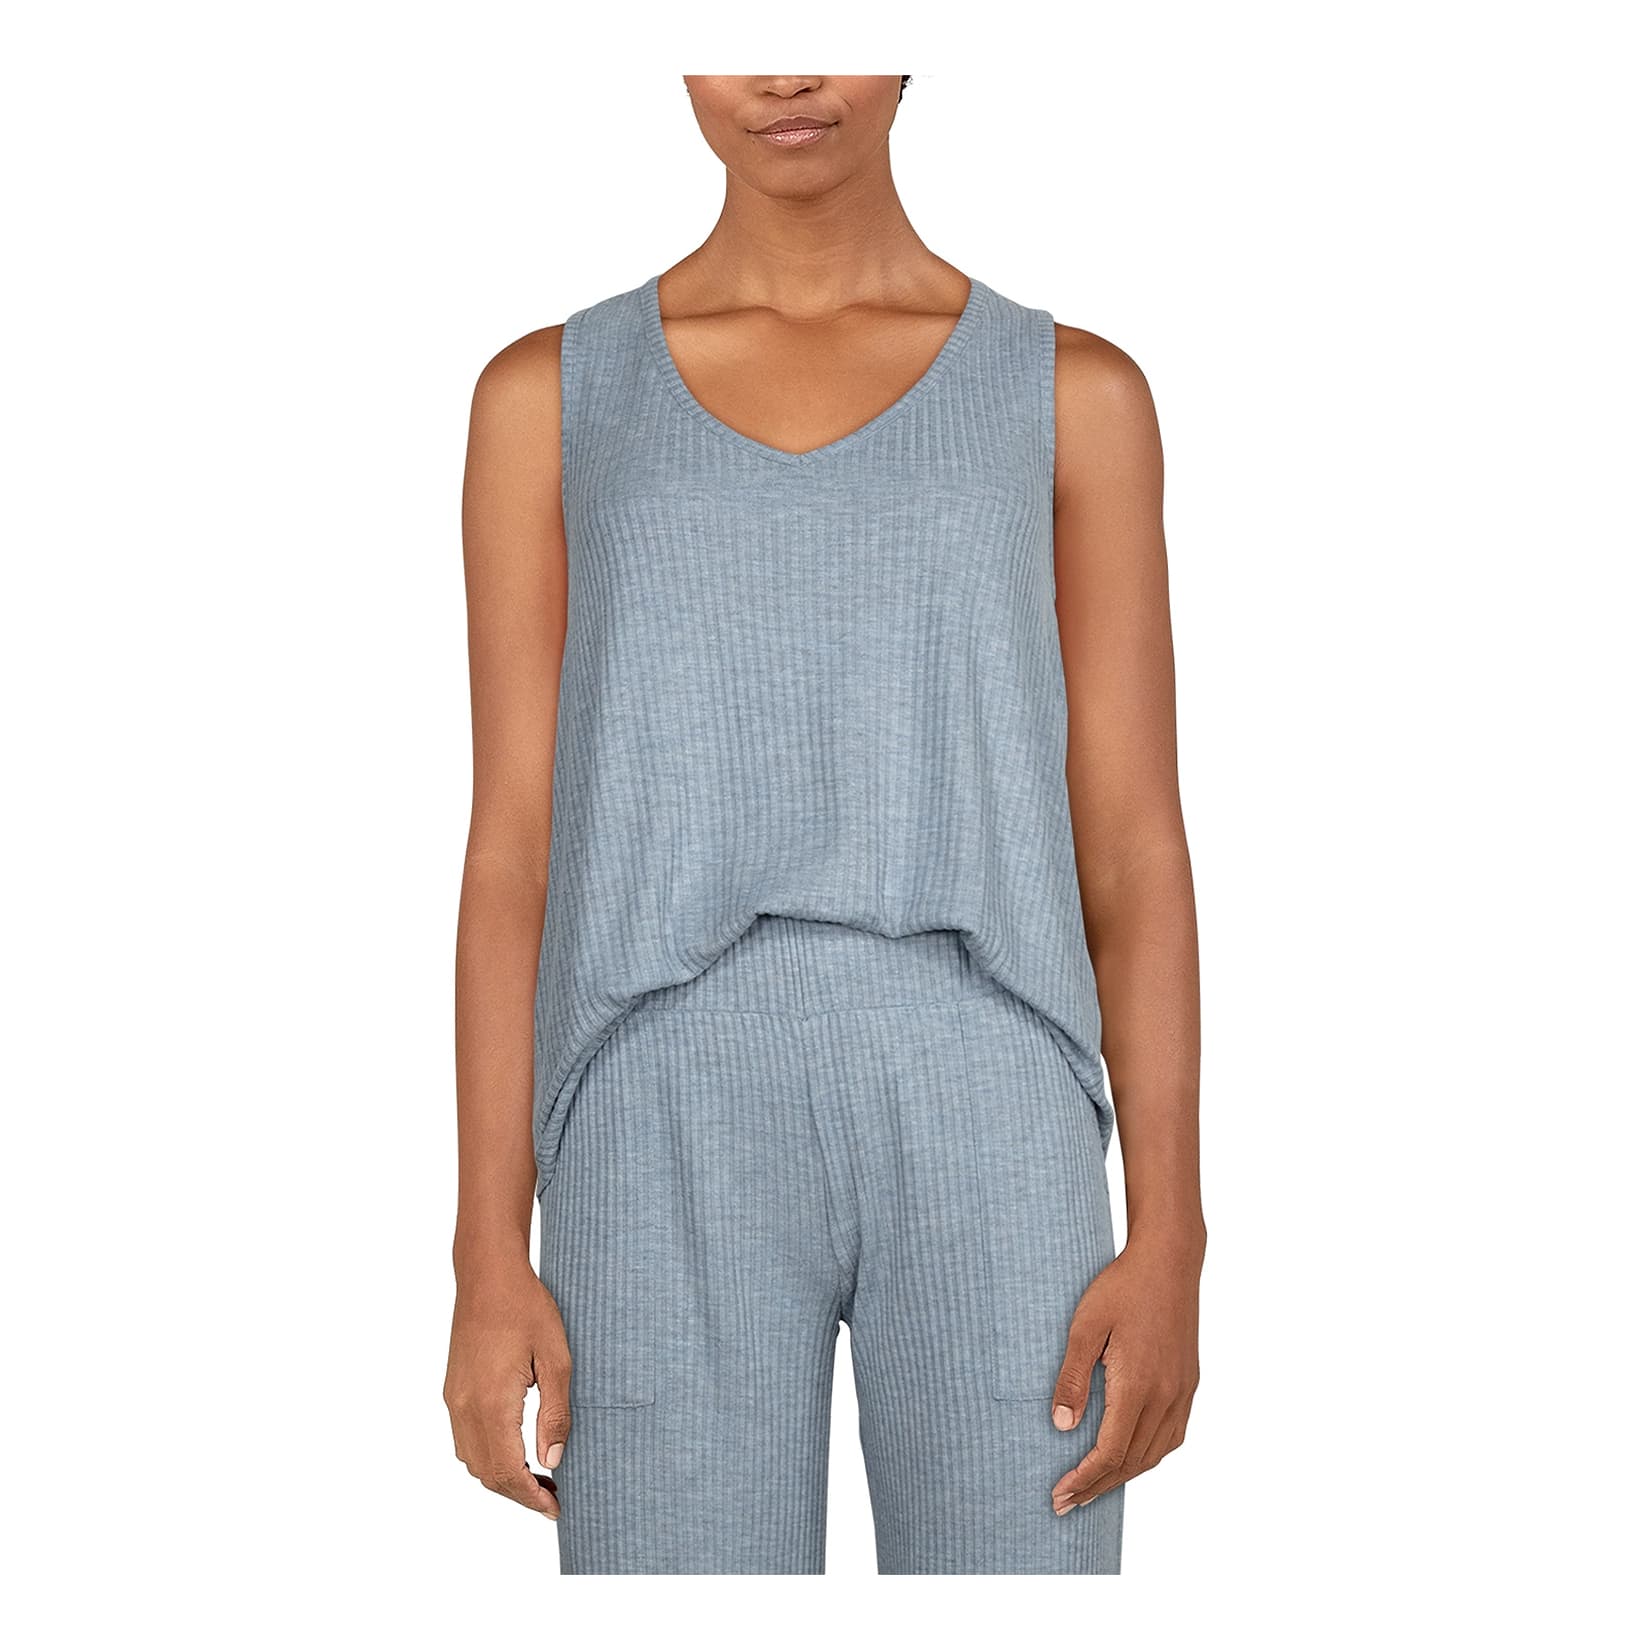 Natural Reflections® Women’s Rib-Knit Tank Top - Blue Heather